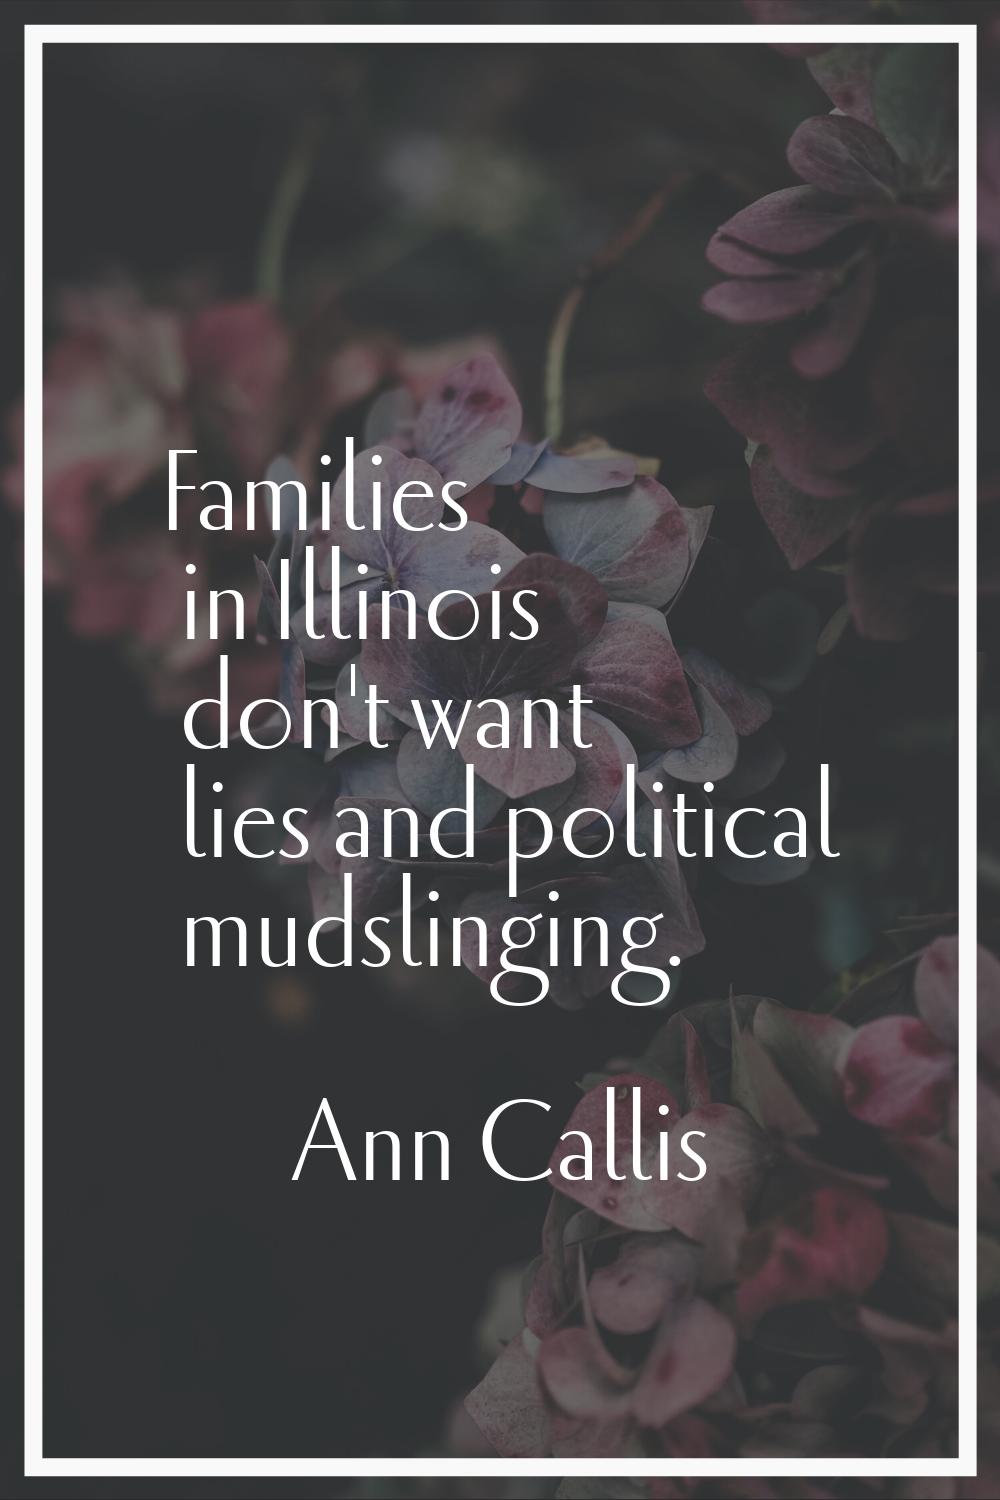 Families in Illinois don't want lies and political mudslinging.